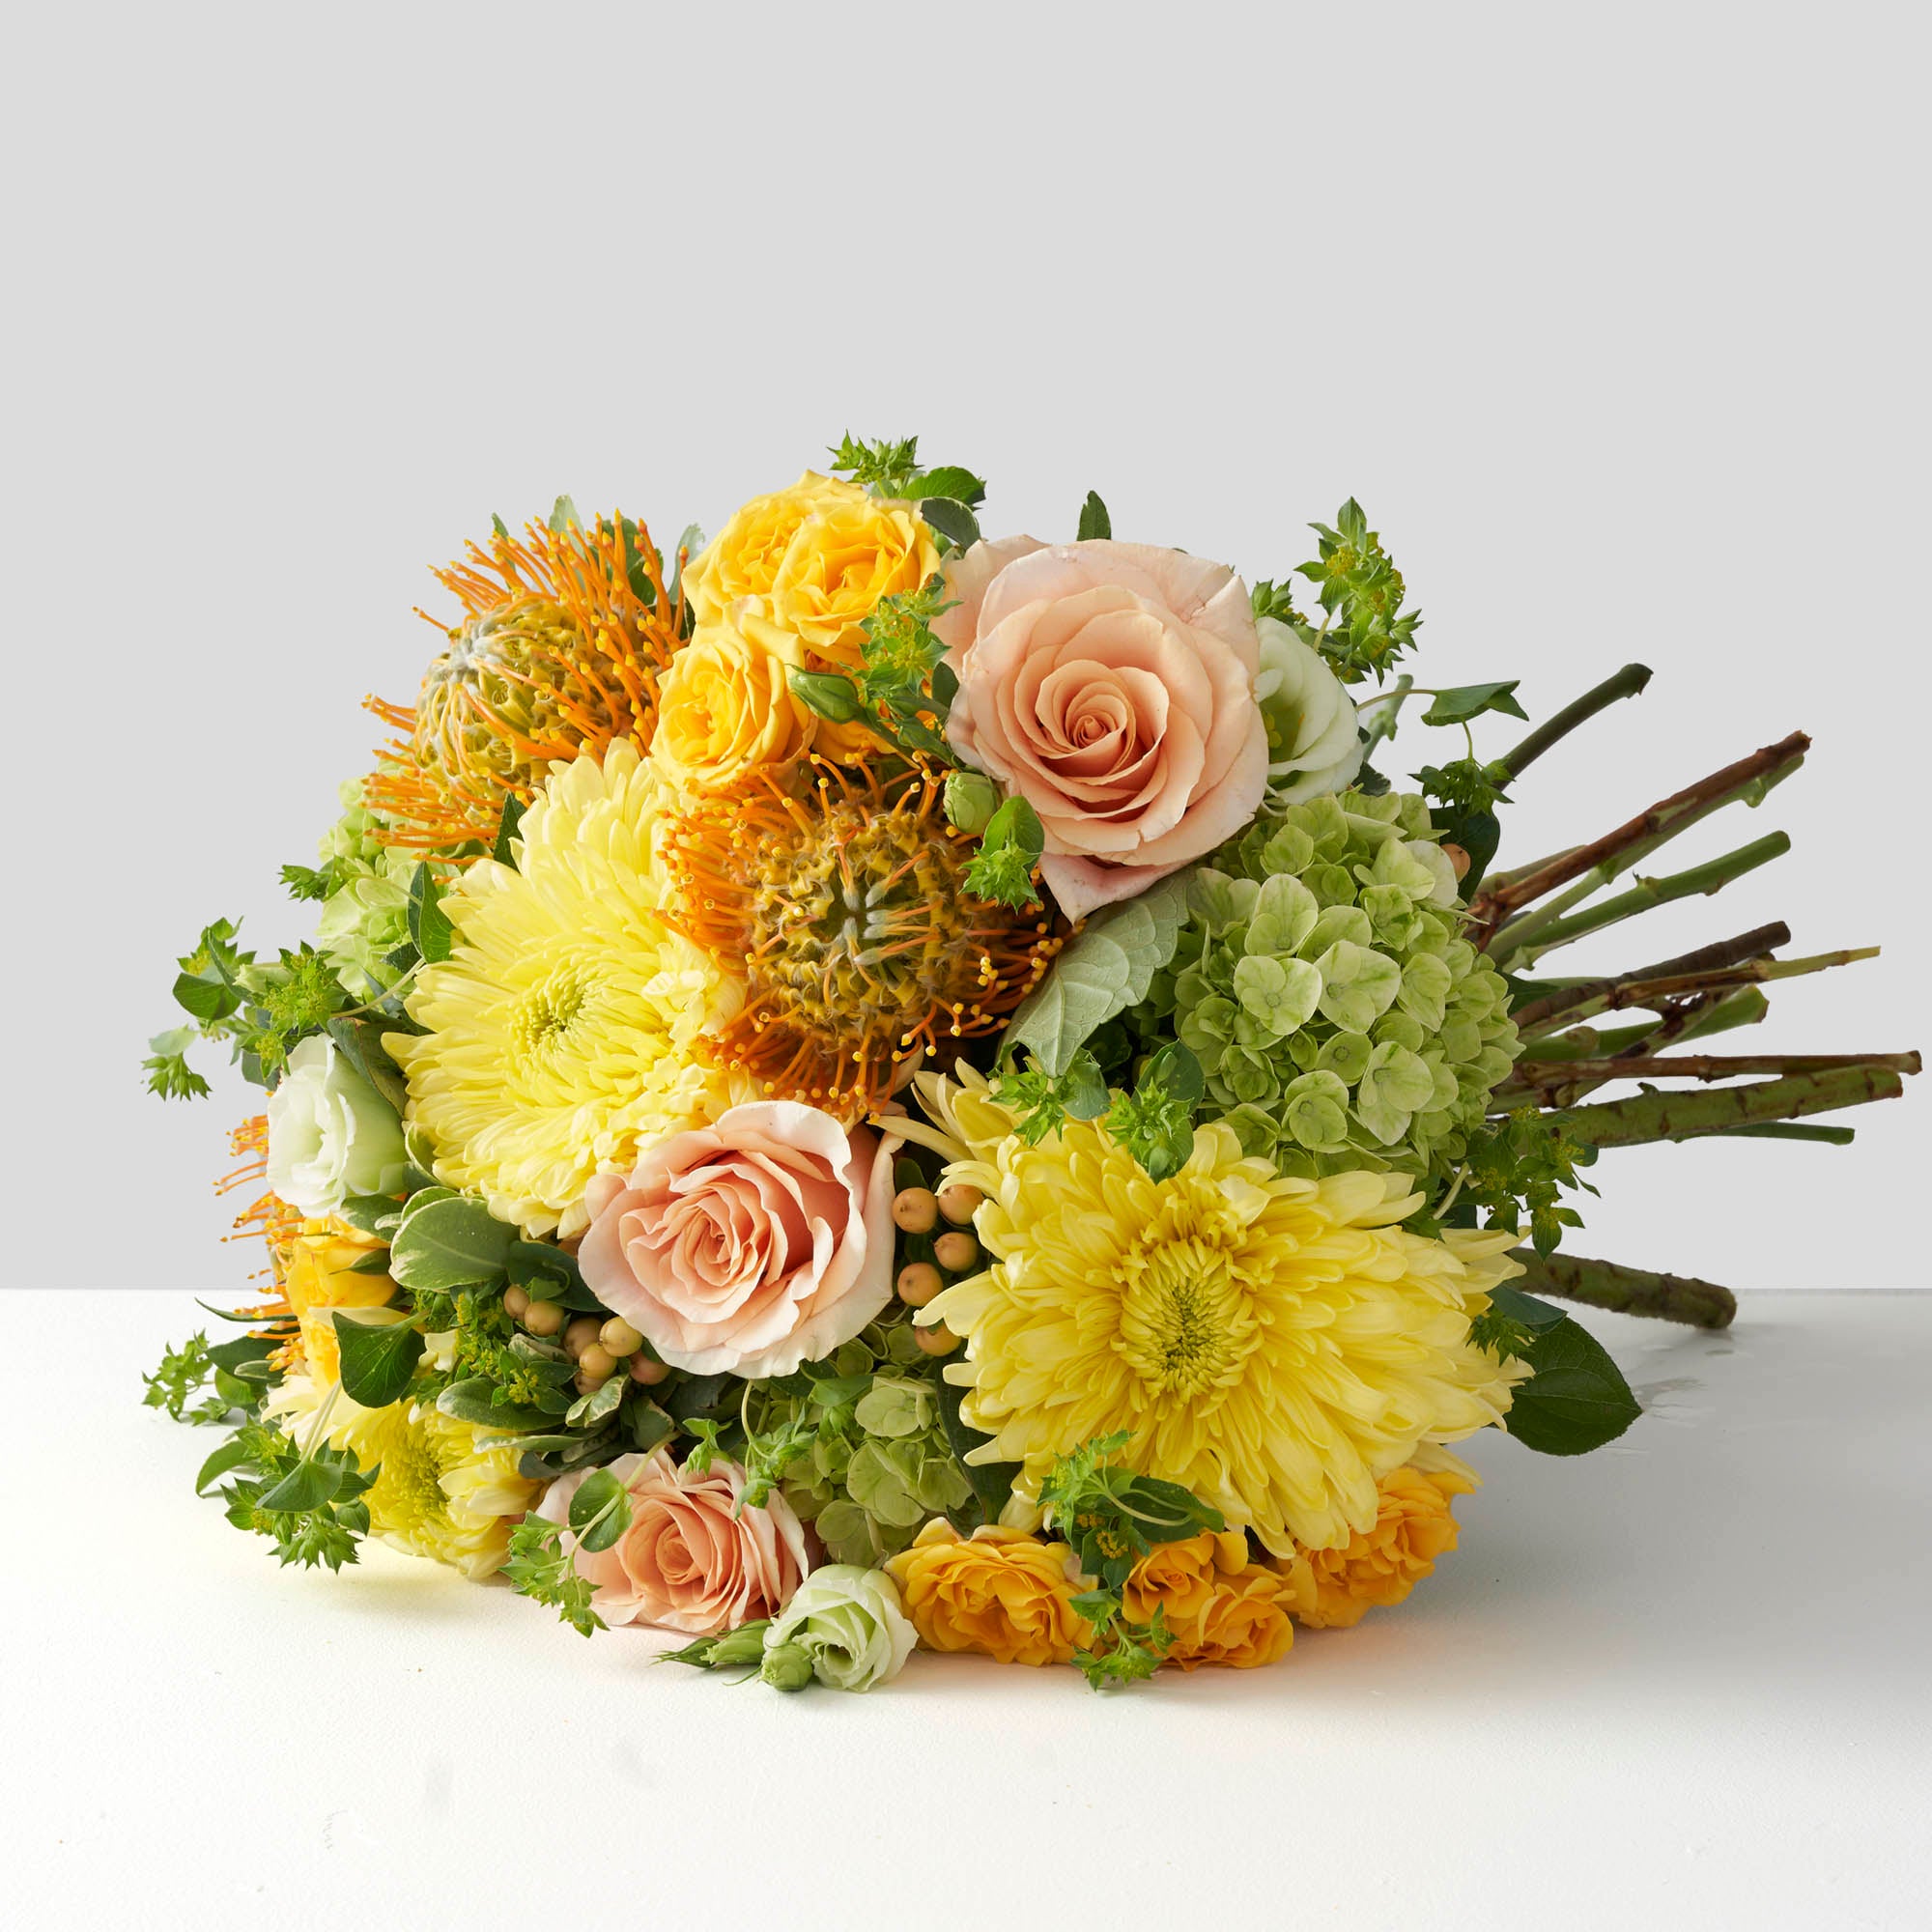 Bouquet of yellow chrysanthemums, peach roses, green hydrangea, peach hypericum berries and gold protea flowers on white background.